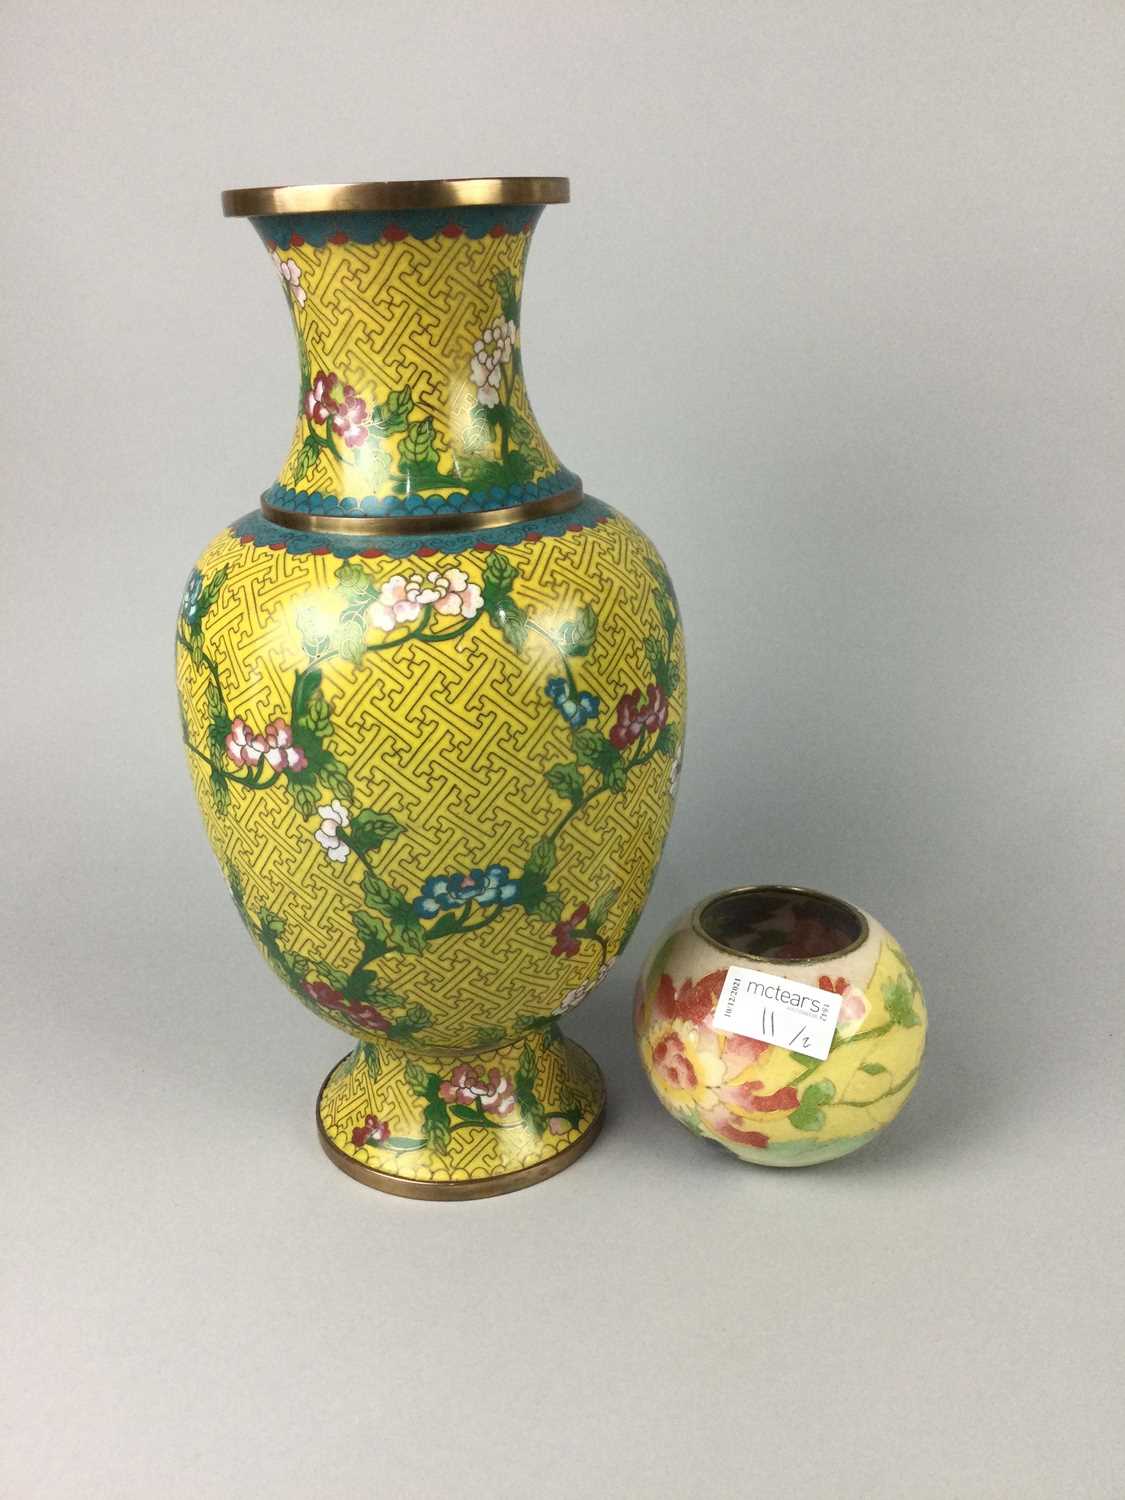 Lot 11 - A 20TH CENTURY CHINESE CLOISONNE VASE AND ANOTHER VASE